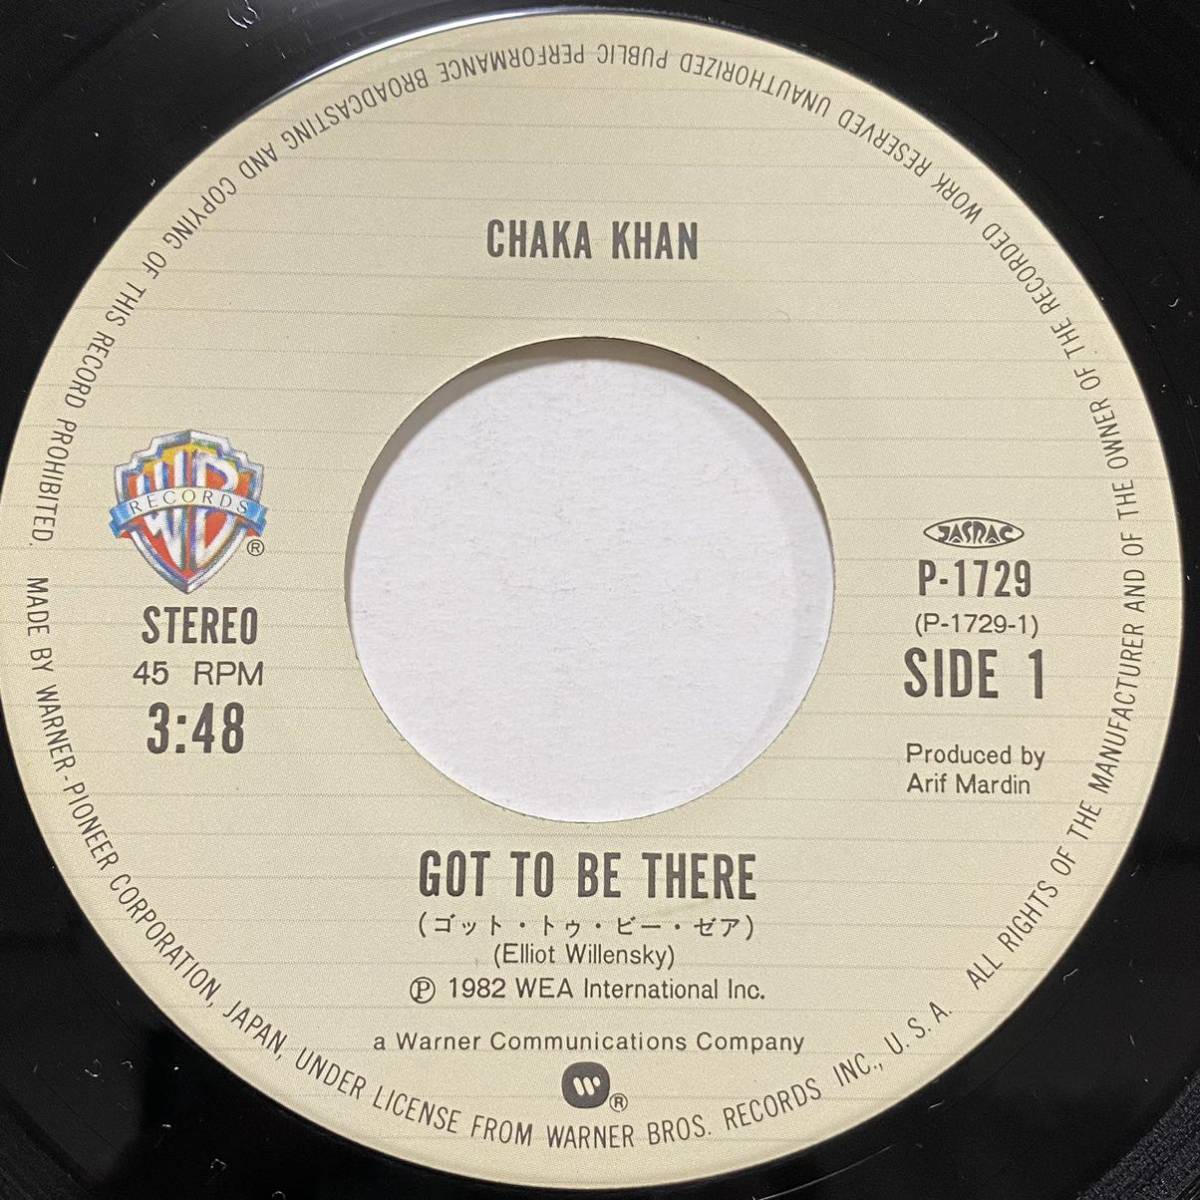 Chaka Khan got to be there pass it on a sure thing チャカ カーン 7inch 7インチ EP 国内盤 Michael Jackson マイケルジャクソン カバーの画像2